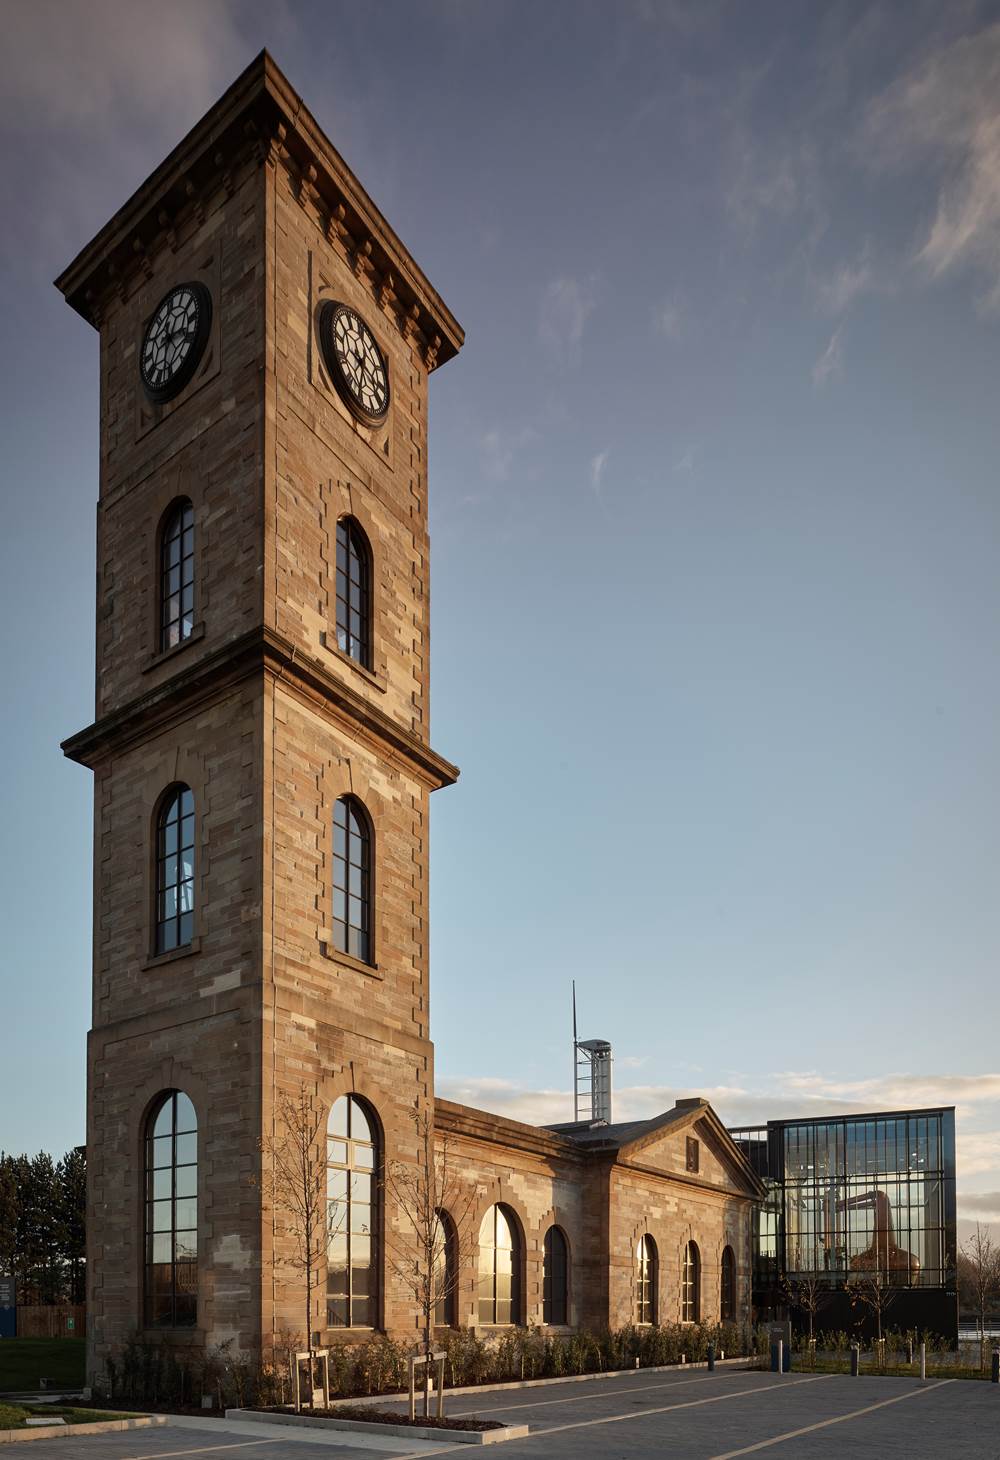 The Clydeside Distillery - the tower